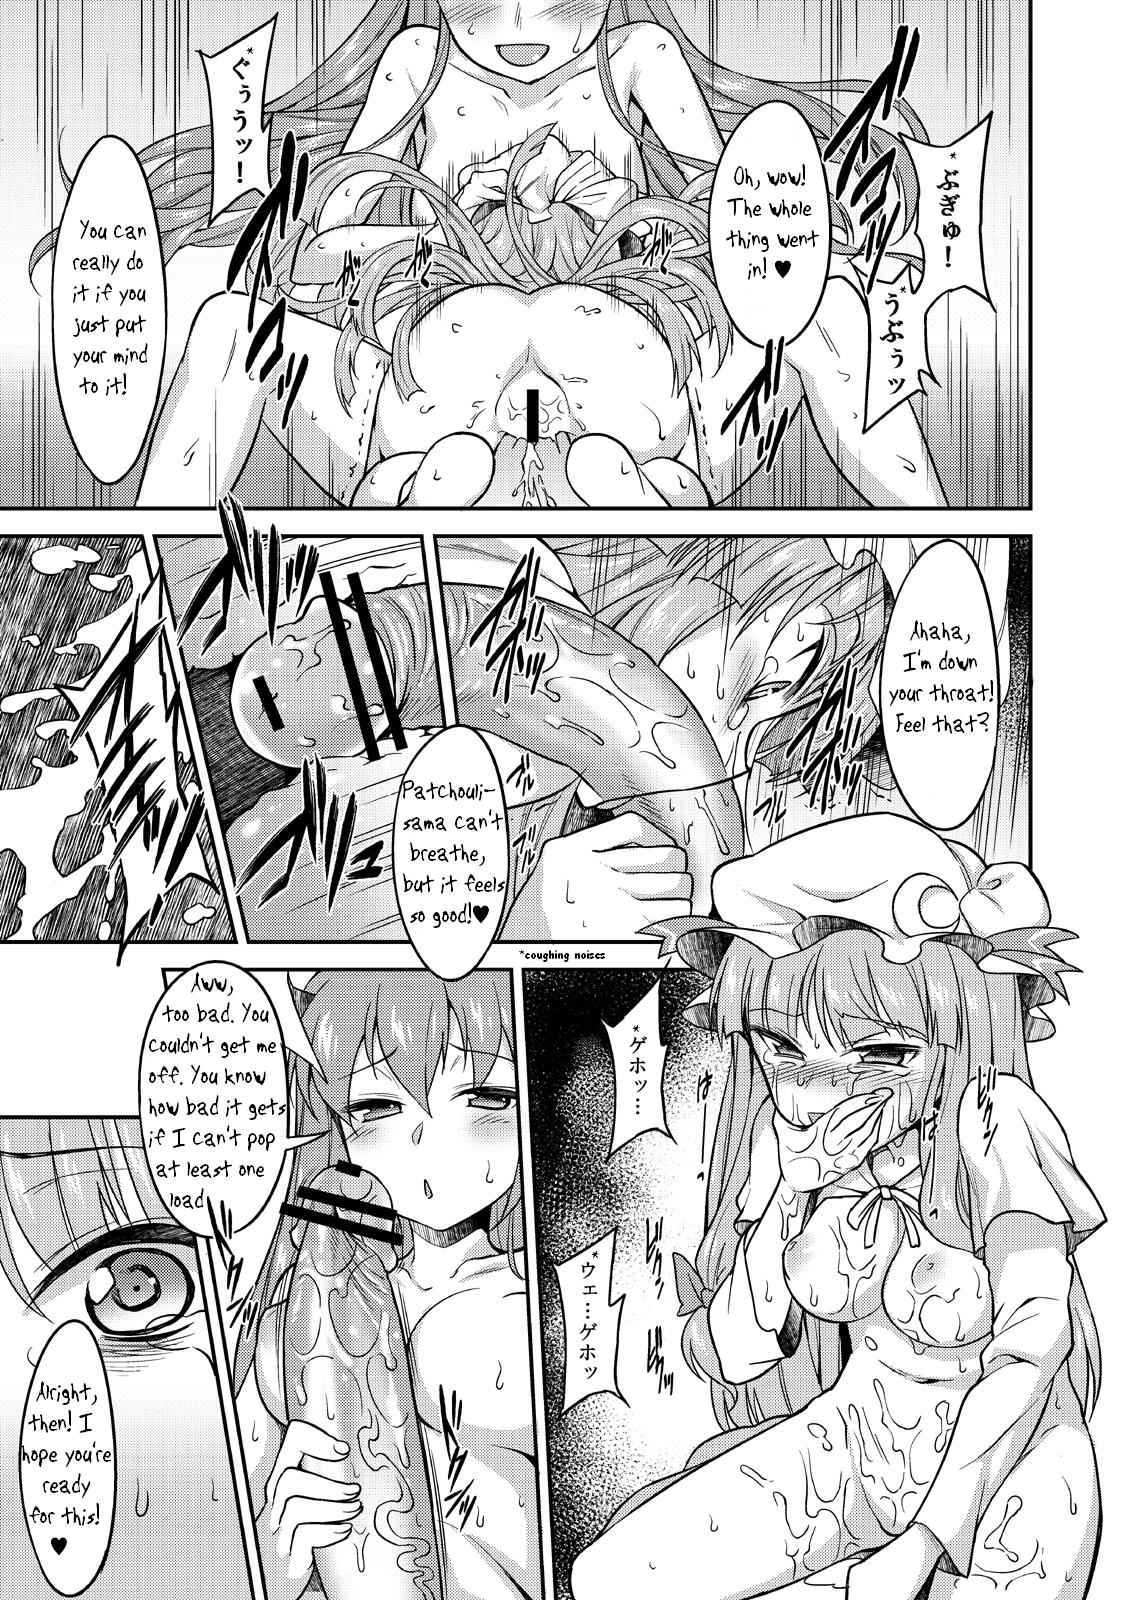 Doing Mean Things to Patchouli 5